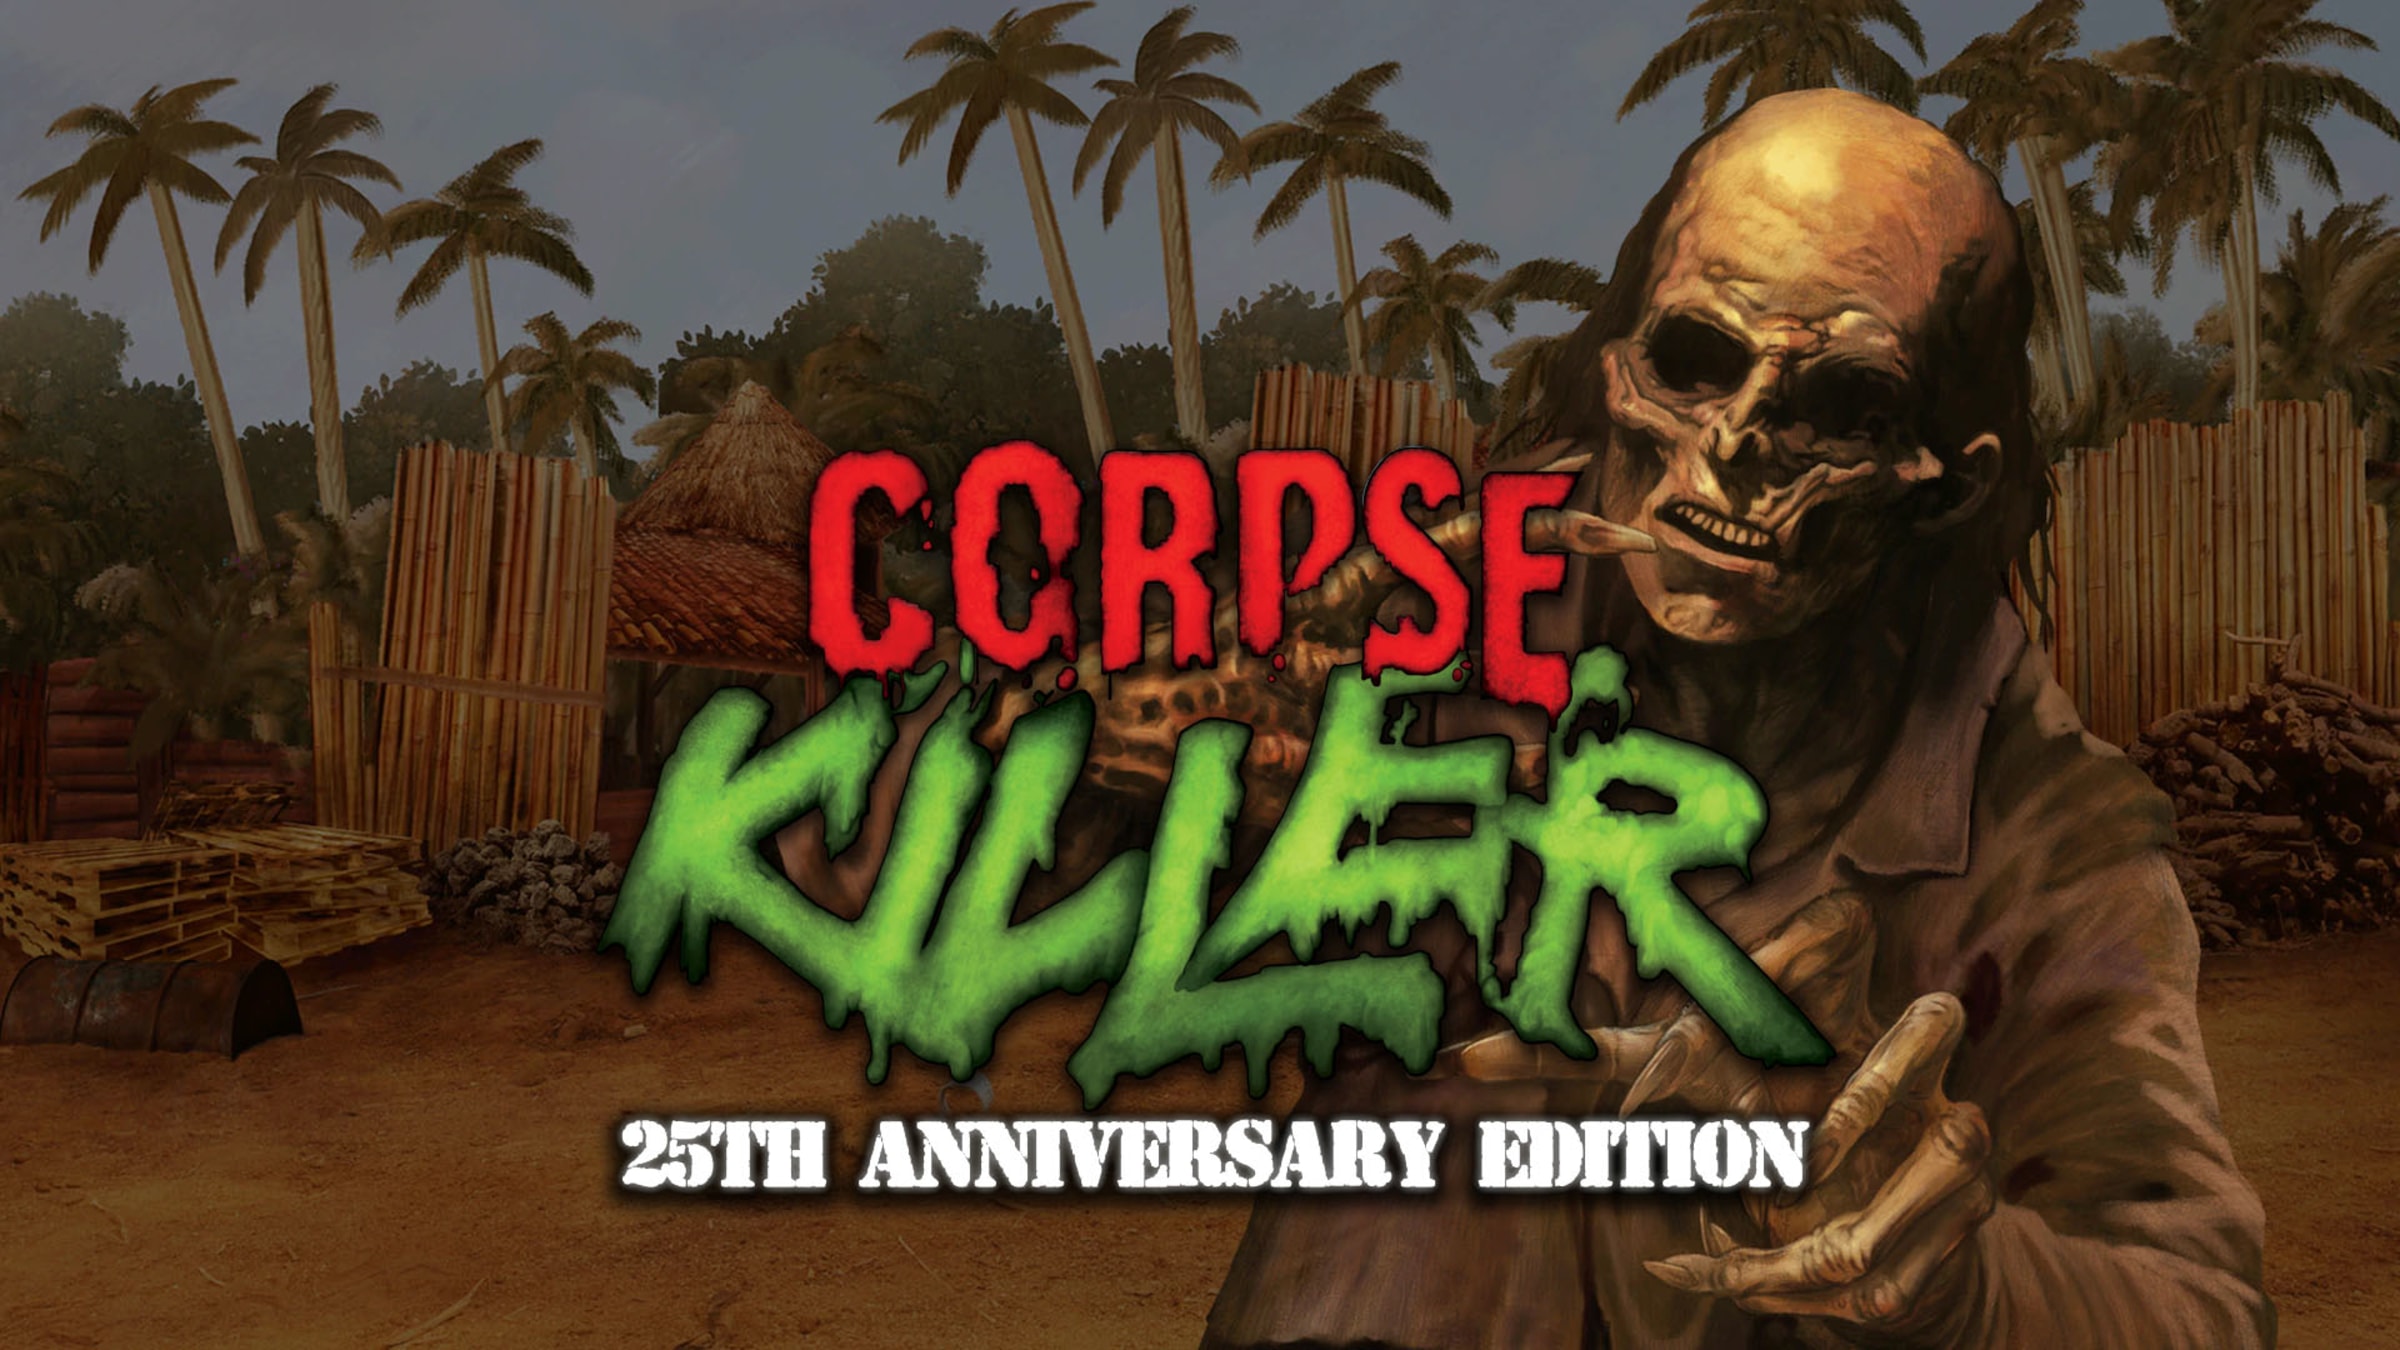 Corpse Killer will be an open two-week preorder starting July 5th